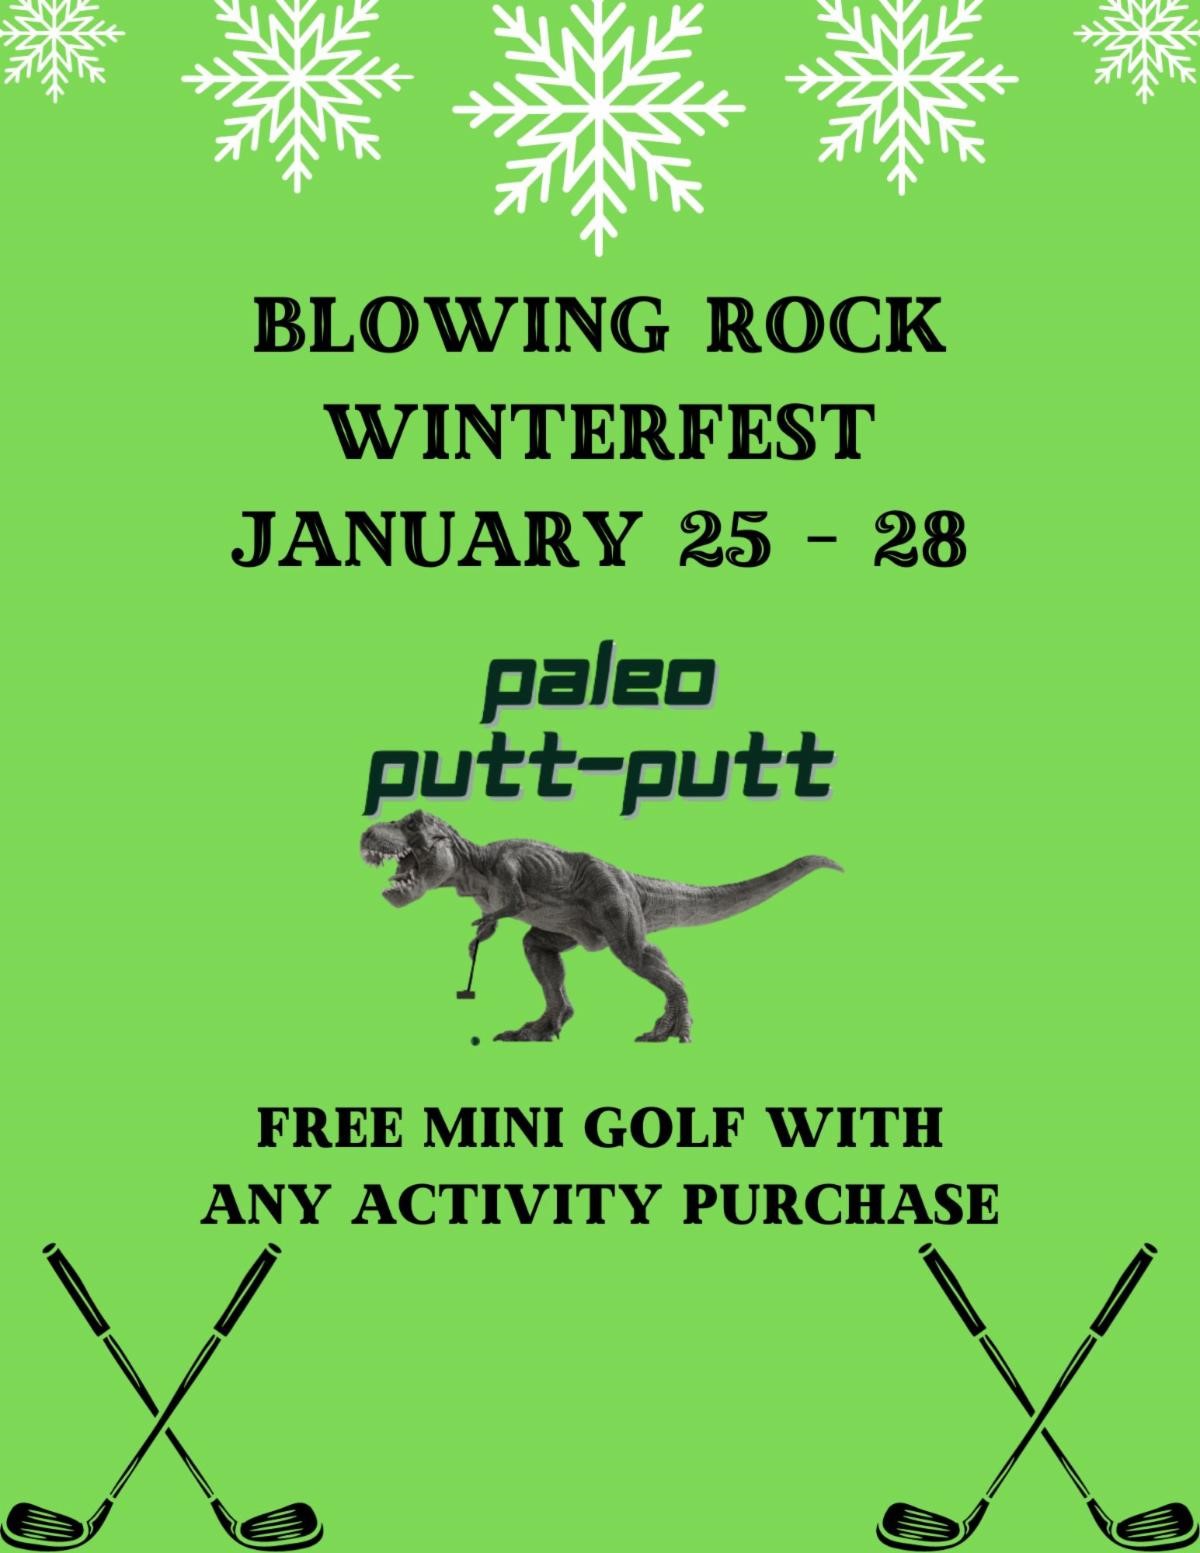 Doc’s Rocks FREE Paleo Putt-Putt with any activity purchase!!